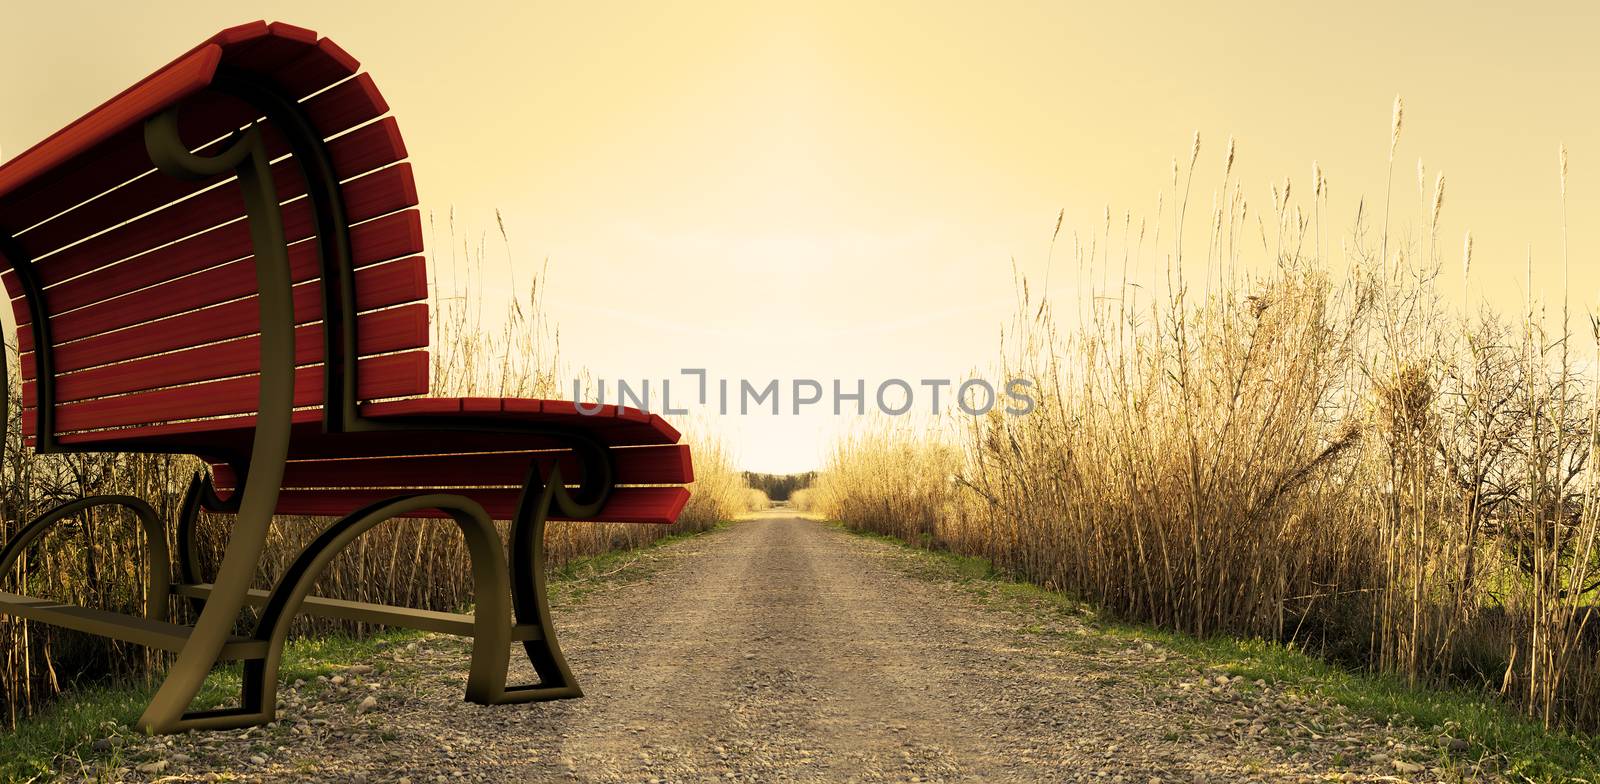 surreal image of park bench on the way. Travel Concept